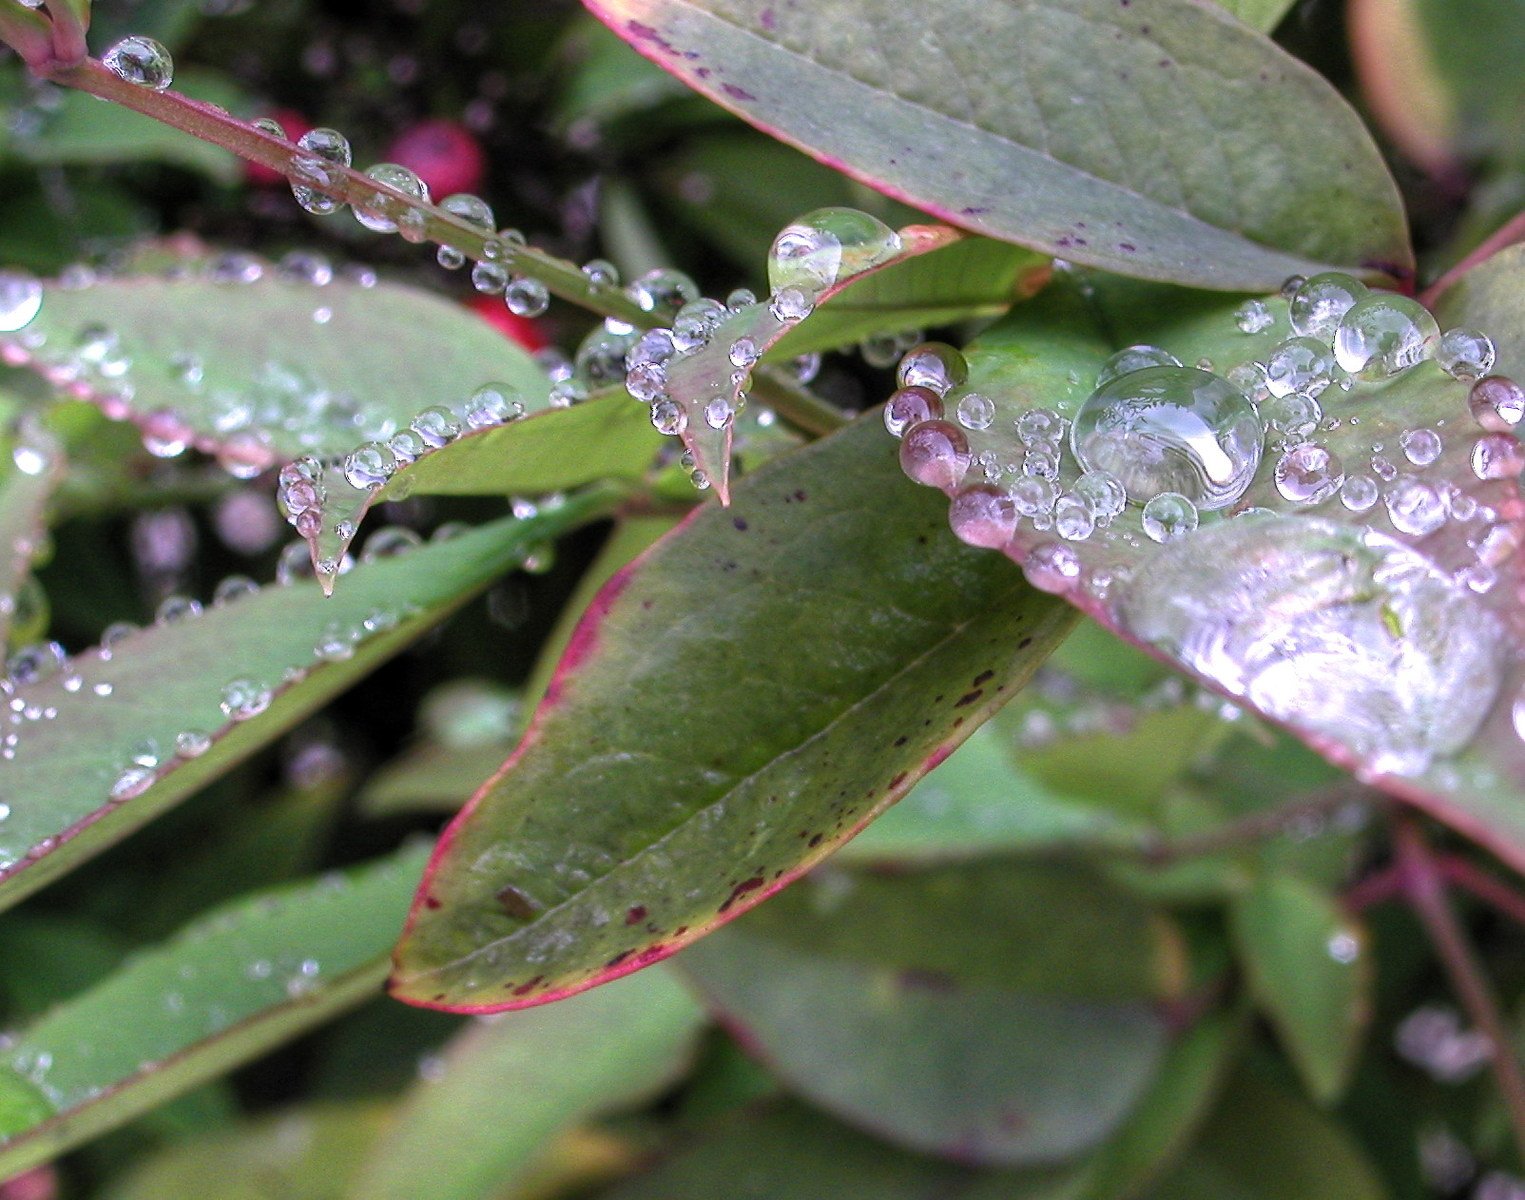 drops of water on the leaves of a plant